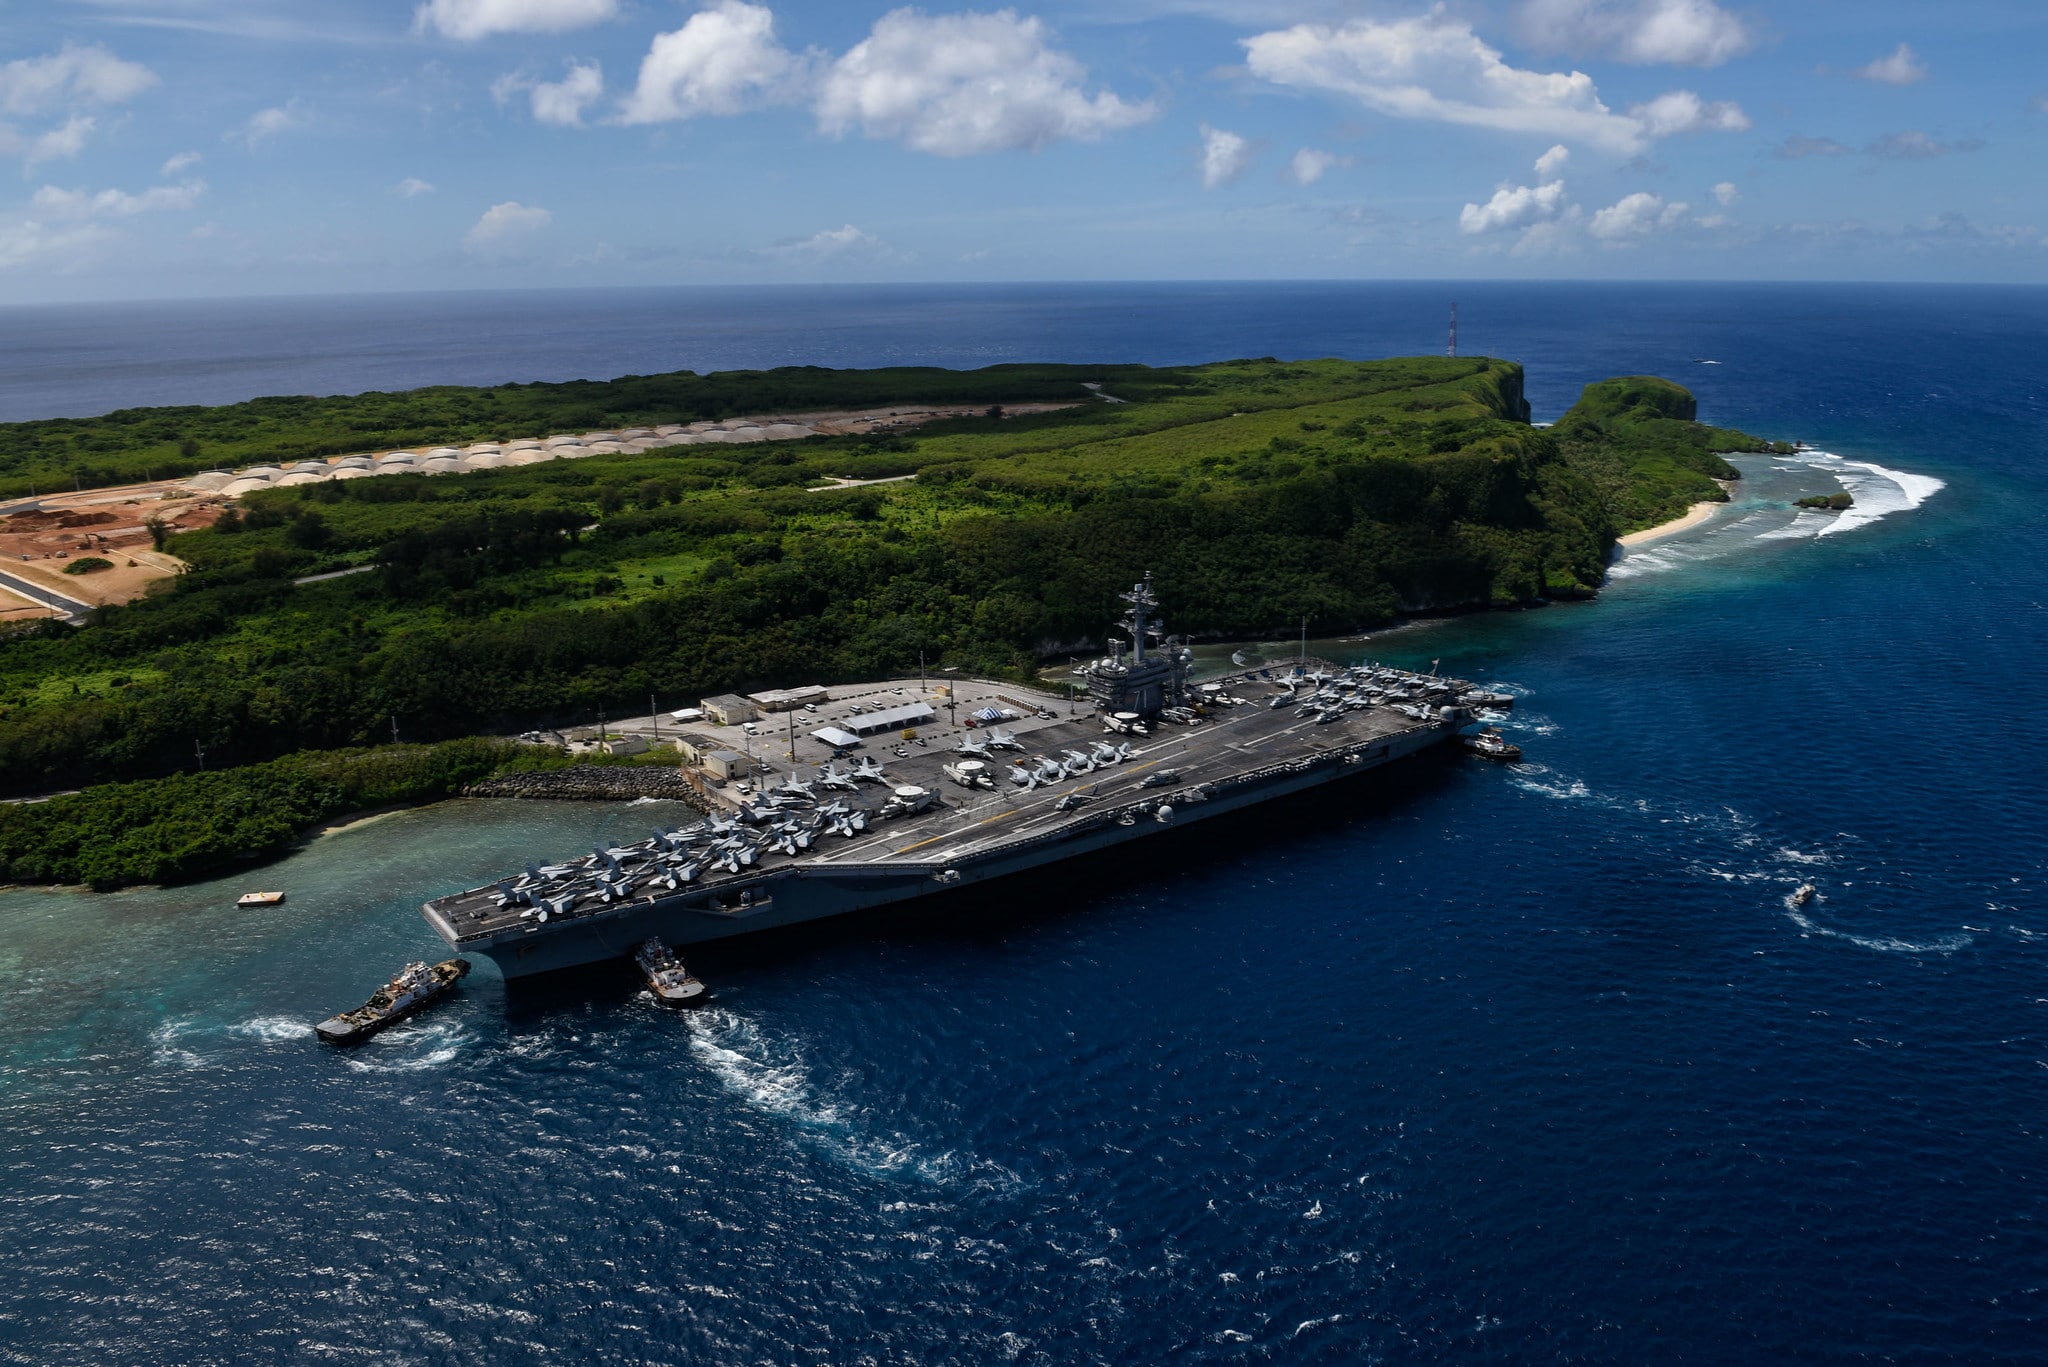 The saga of the USS Roosevelt and Guam, in context